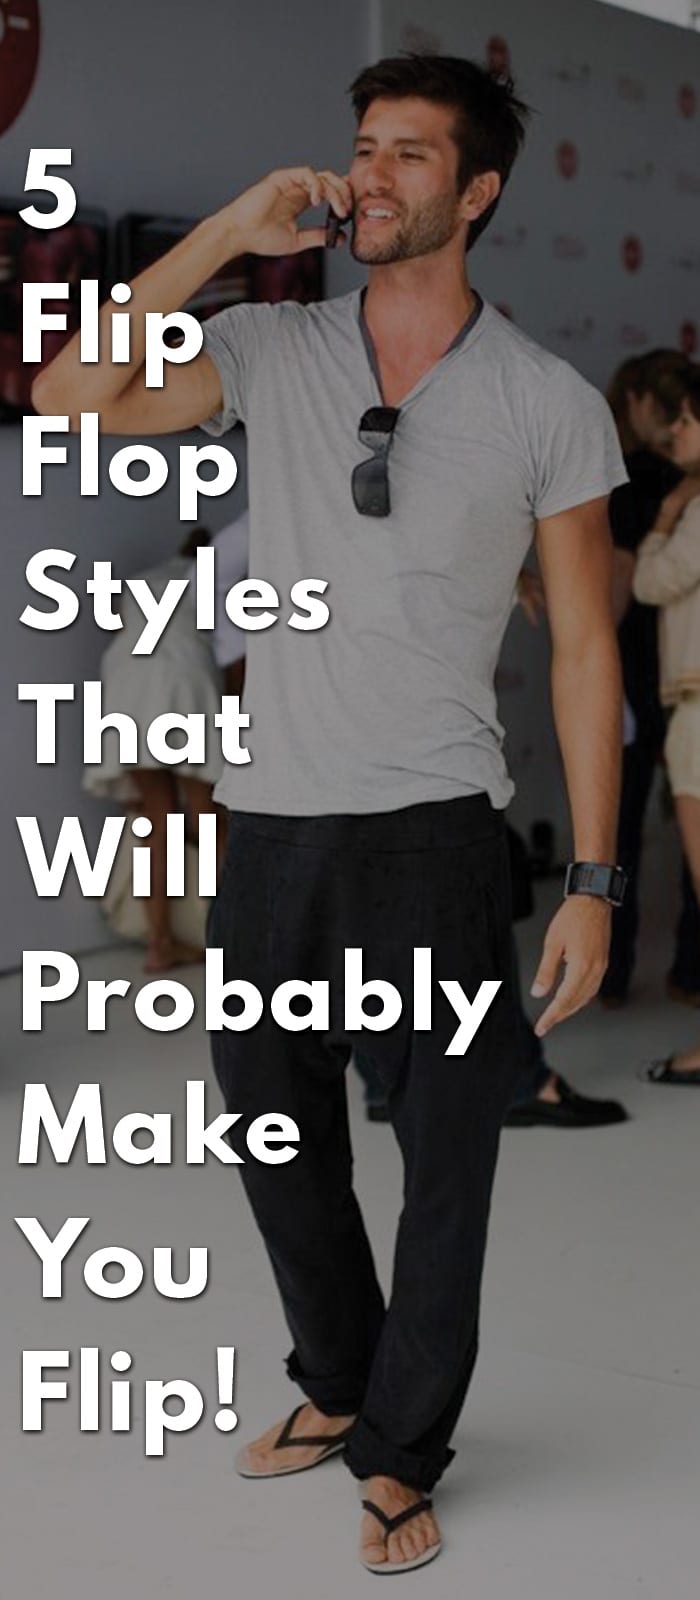 5-Flip-Flop-Styles-that-will-Probably-make-you-Flip!